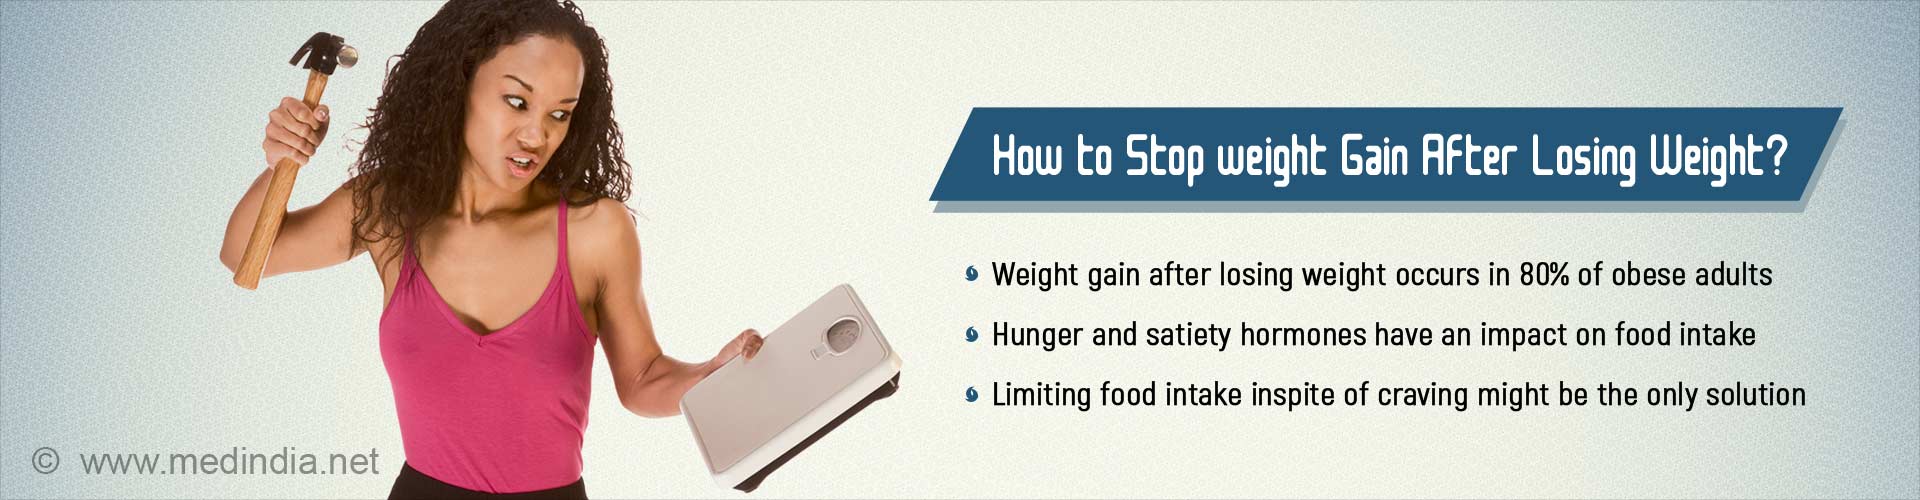 how to stop weight gain after losing weight?
- weight gain after losing weight occurs in 80% of obese adults
- hunger and satiety hormones have an impact on food intake
- limiting food intake inspite of craving might be the only solution